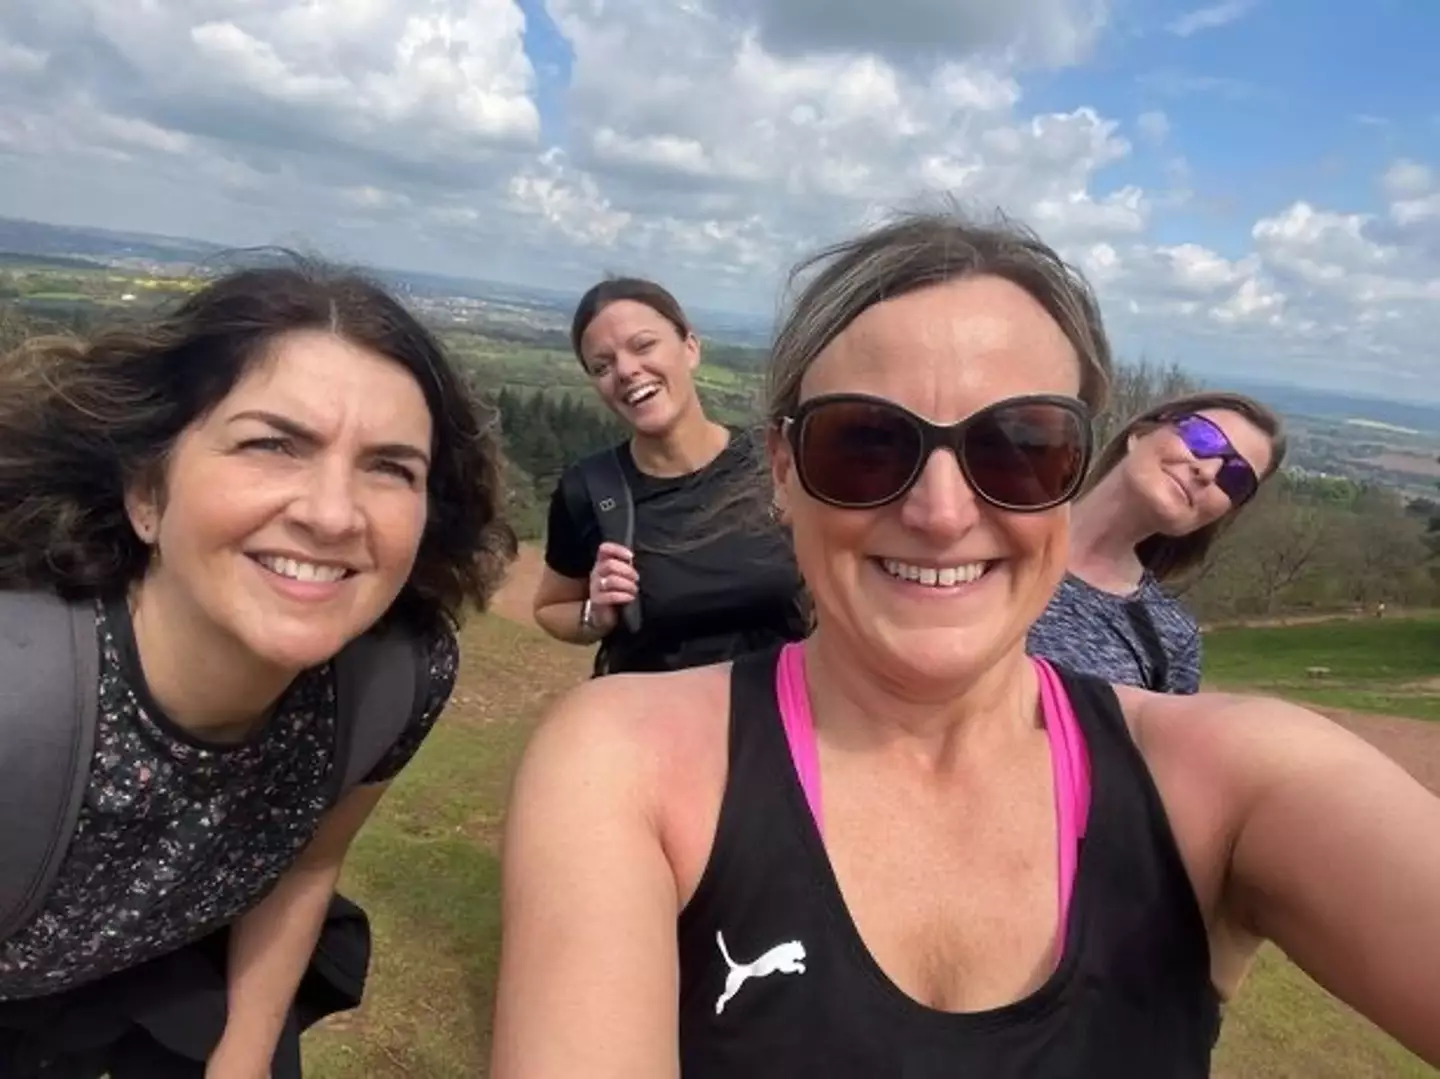 Victoria's friend Jamie-Ann Edwards, 44, is now planning on completing the Yorkshire 3 Peaks Challenge alongside friends Sarah Arnott, Jo Edwards and Gemma Williamson.